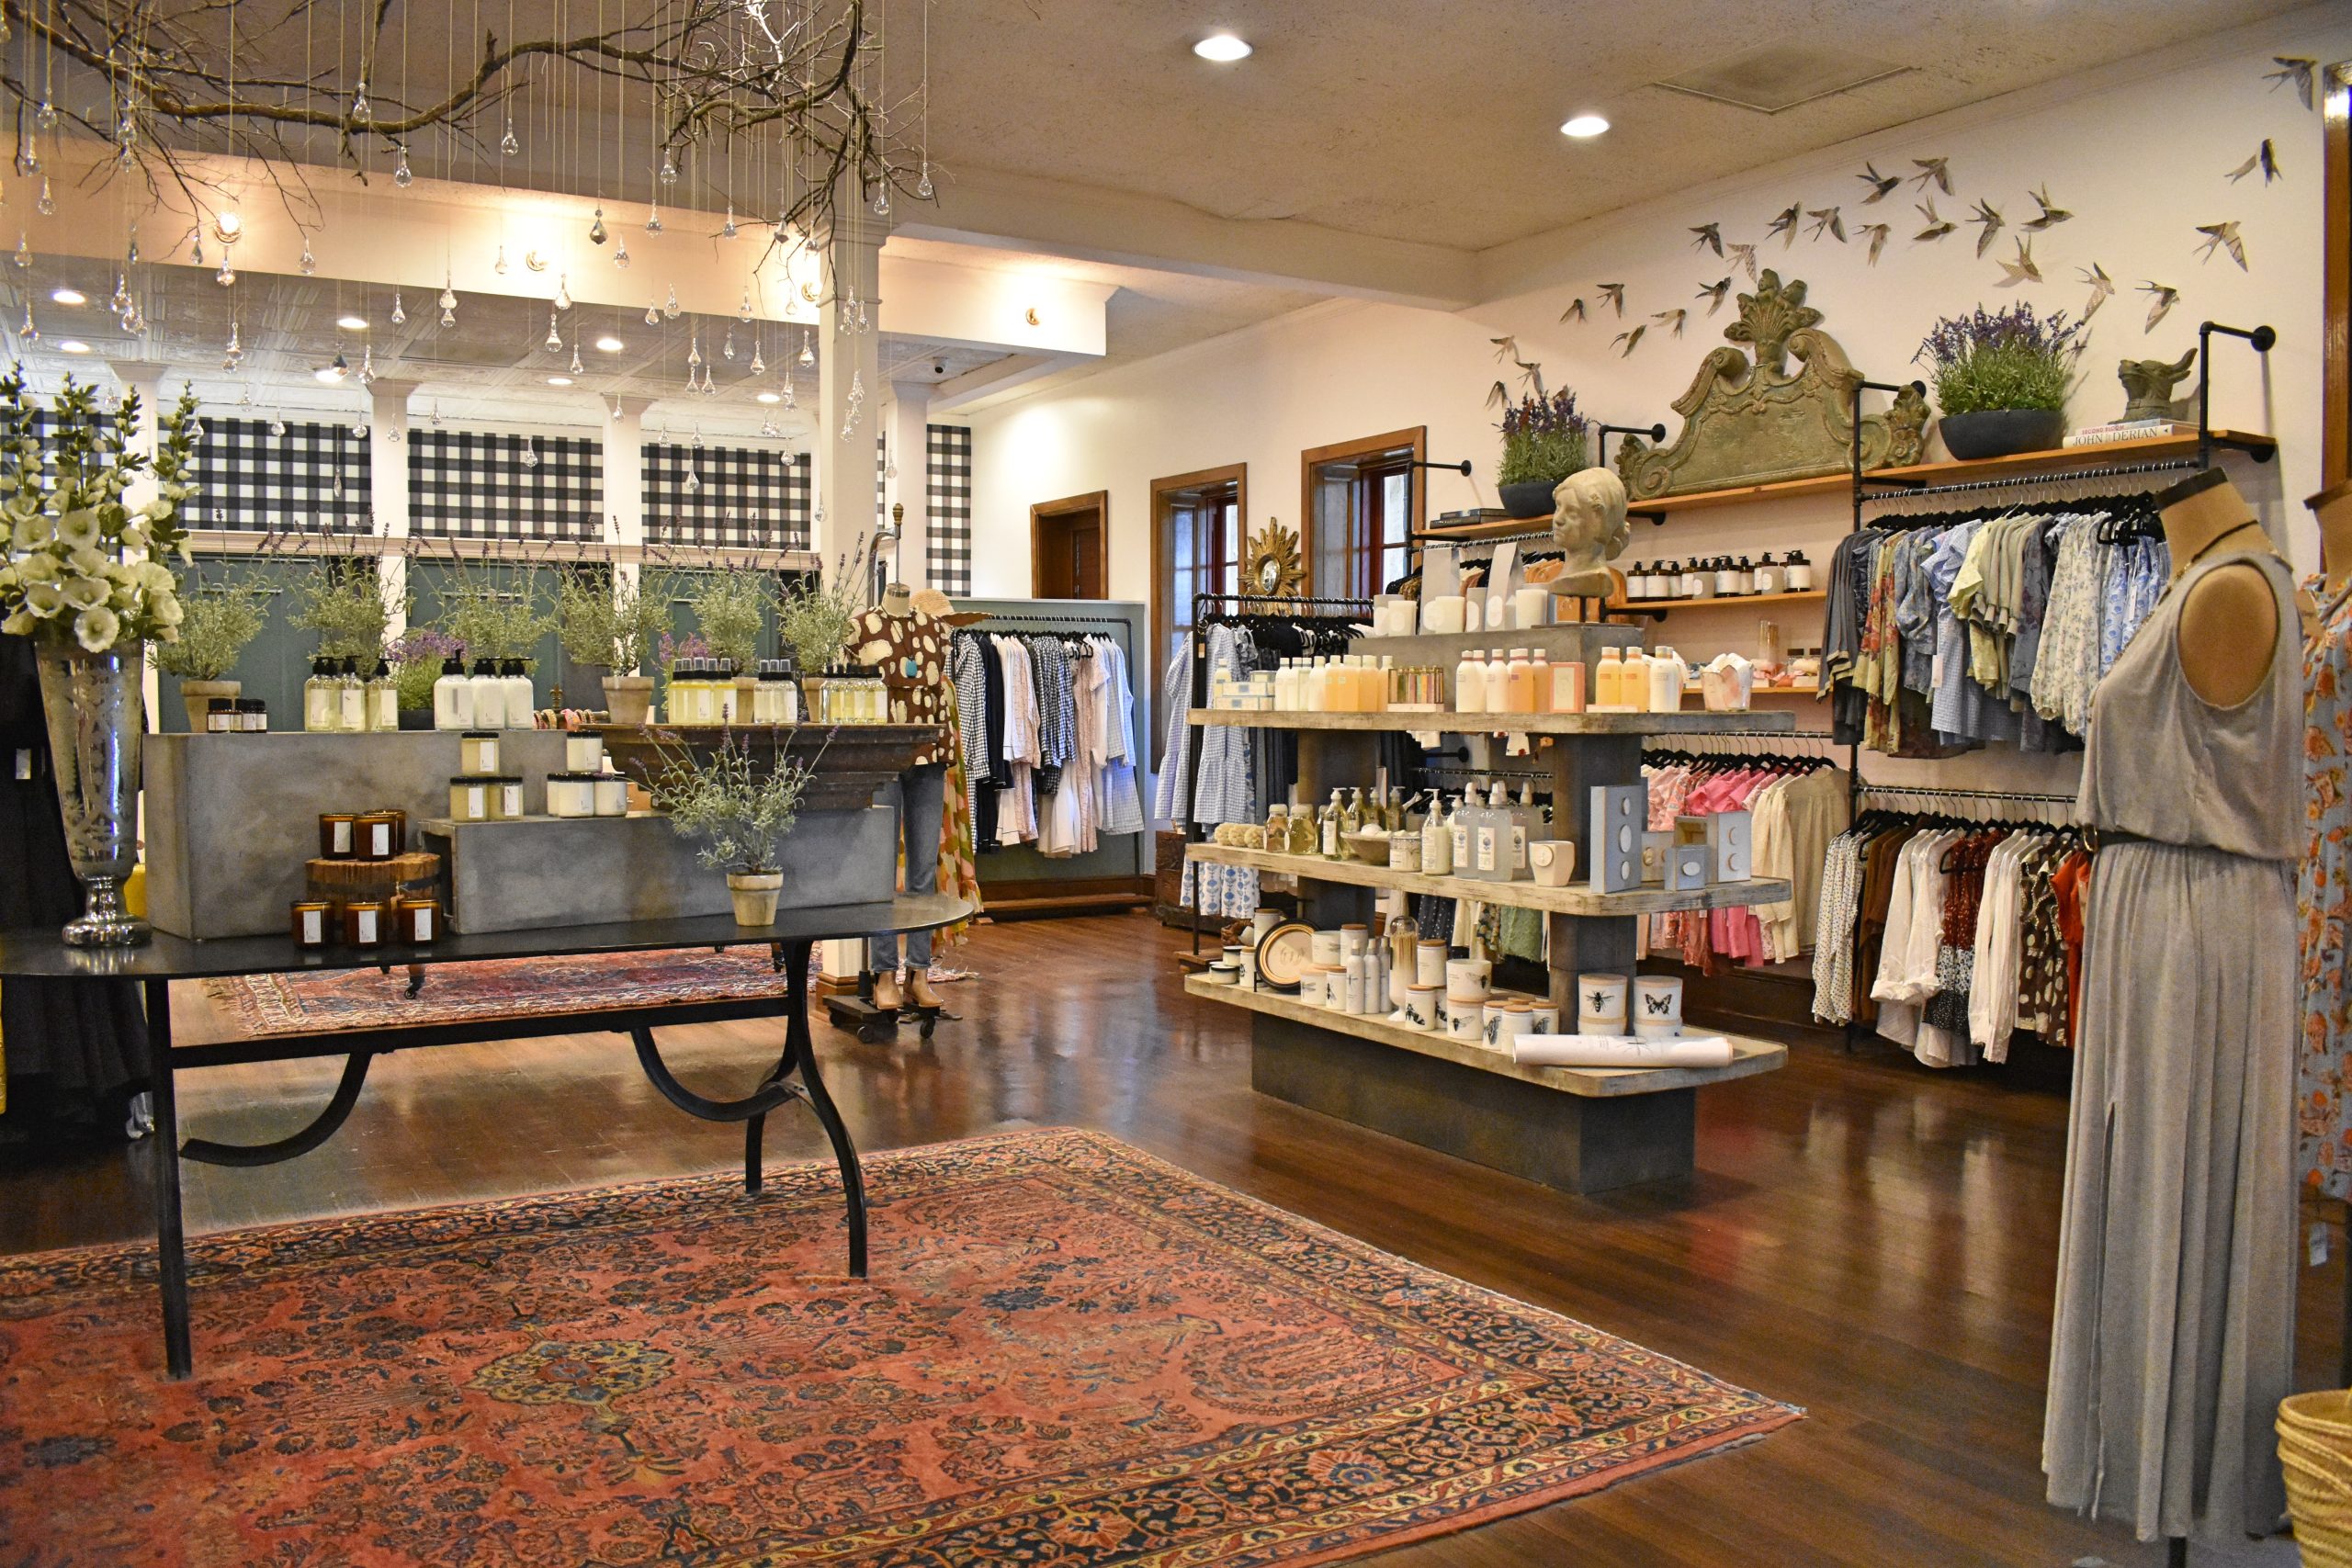 Local Gift Shop Near Me - The Dienger Trading Co. Boutique Boerne Texas